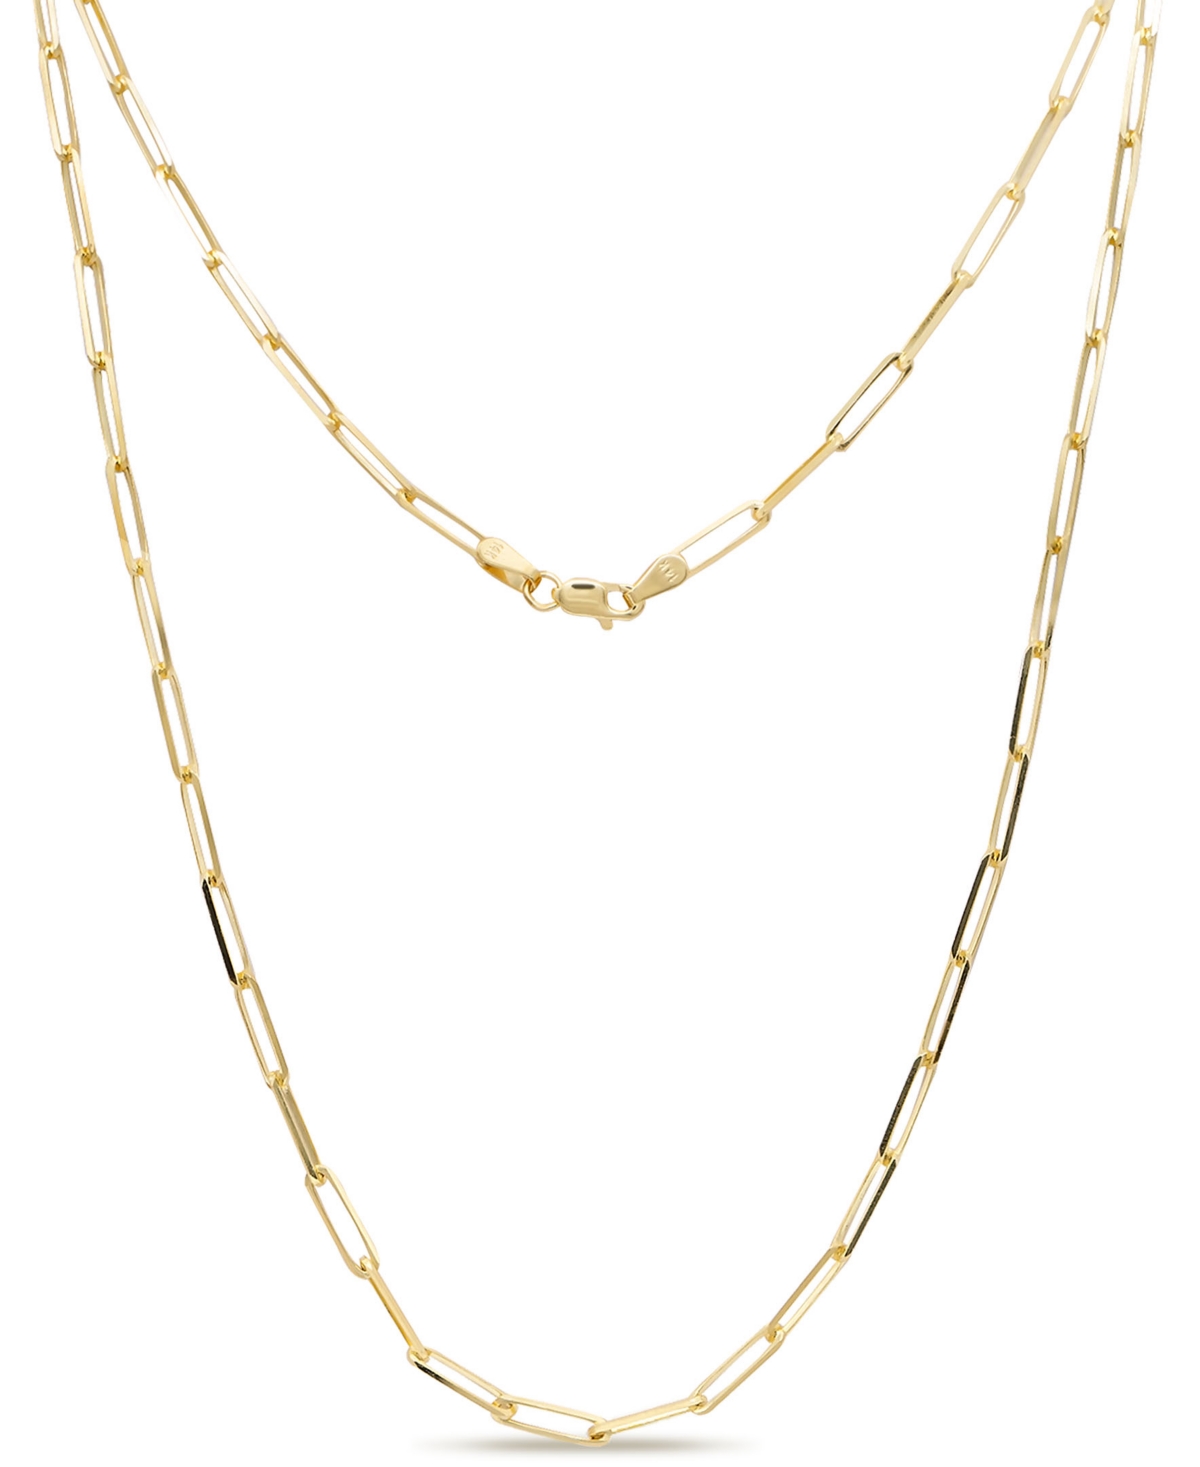 14K Gold Paperclip 2.8mm Chain Necklace, 20", approx. 5.4gr - Gold